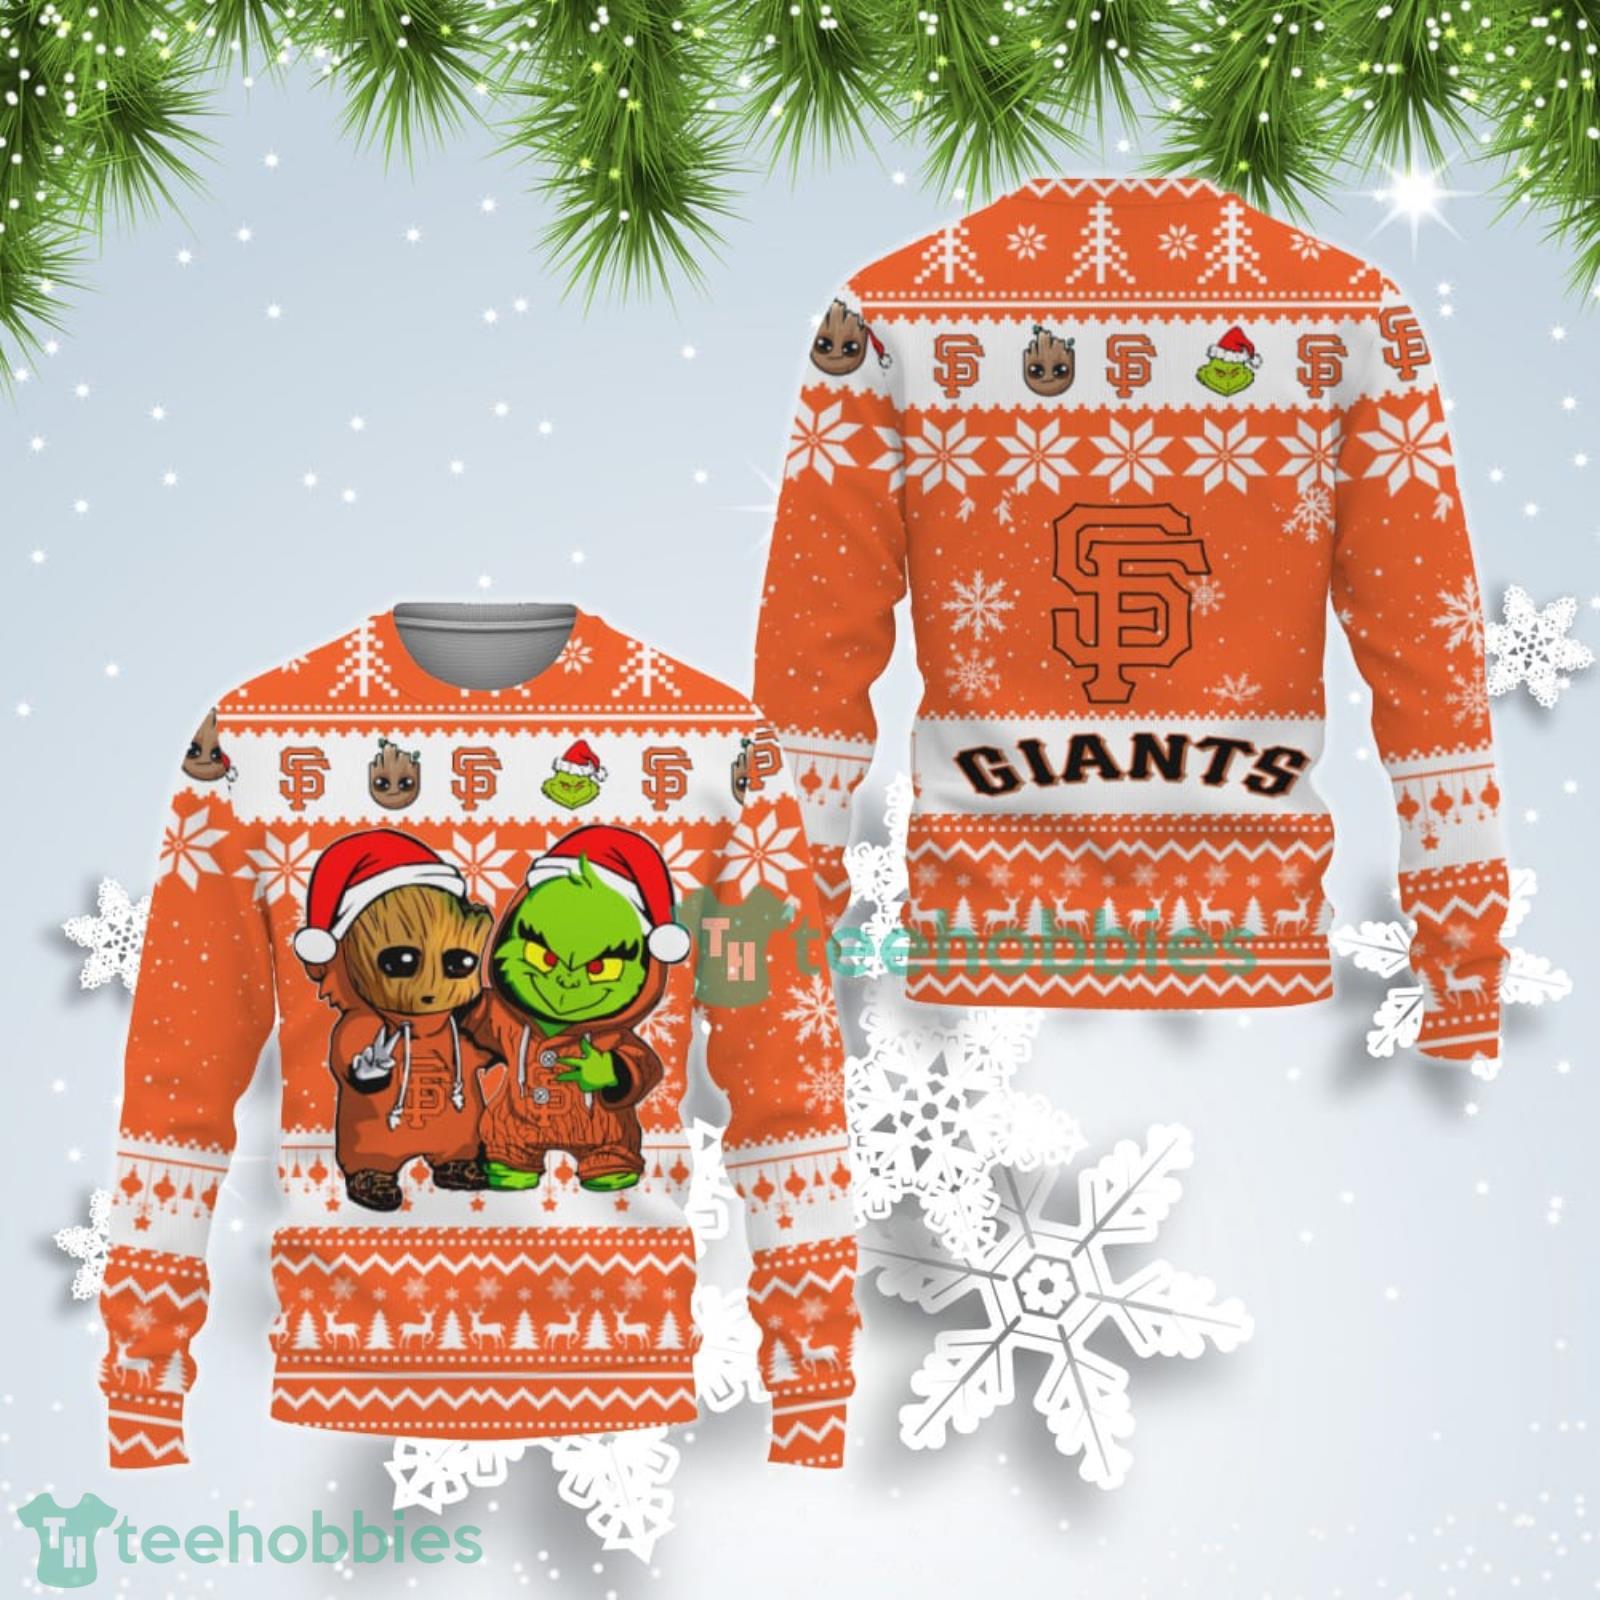 San Francisco Giants Baby Groot And Grinch Best Friends Ugly Christmas Sweater Product Photo 1